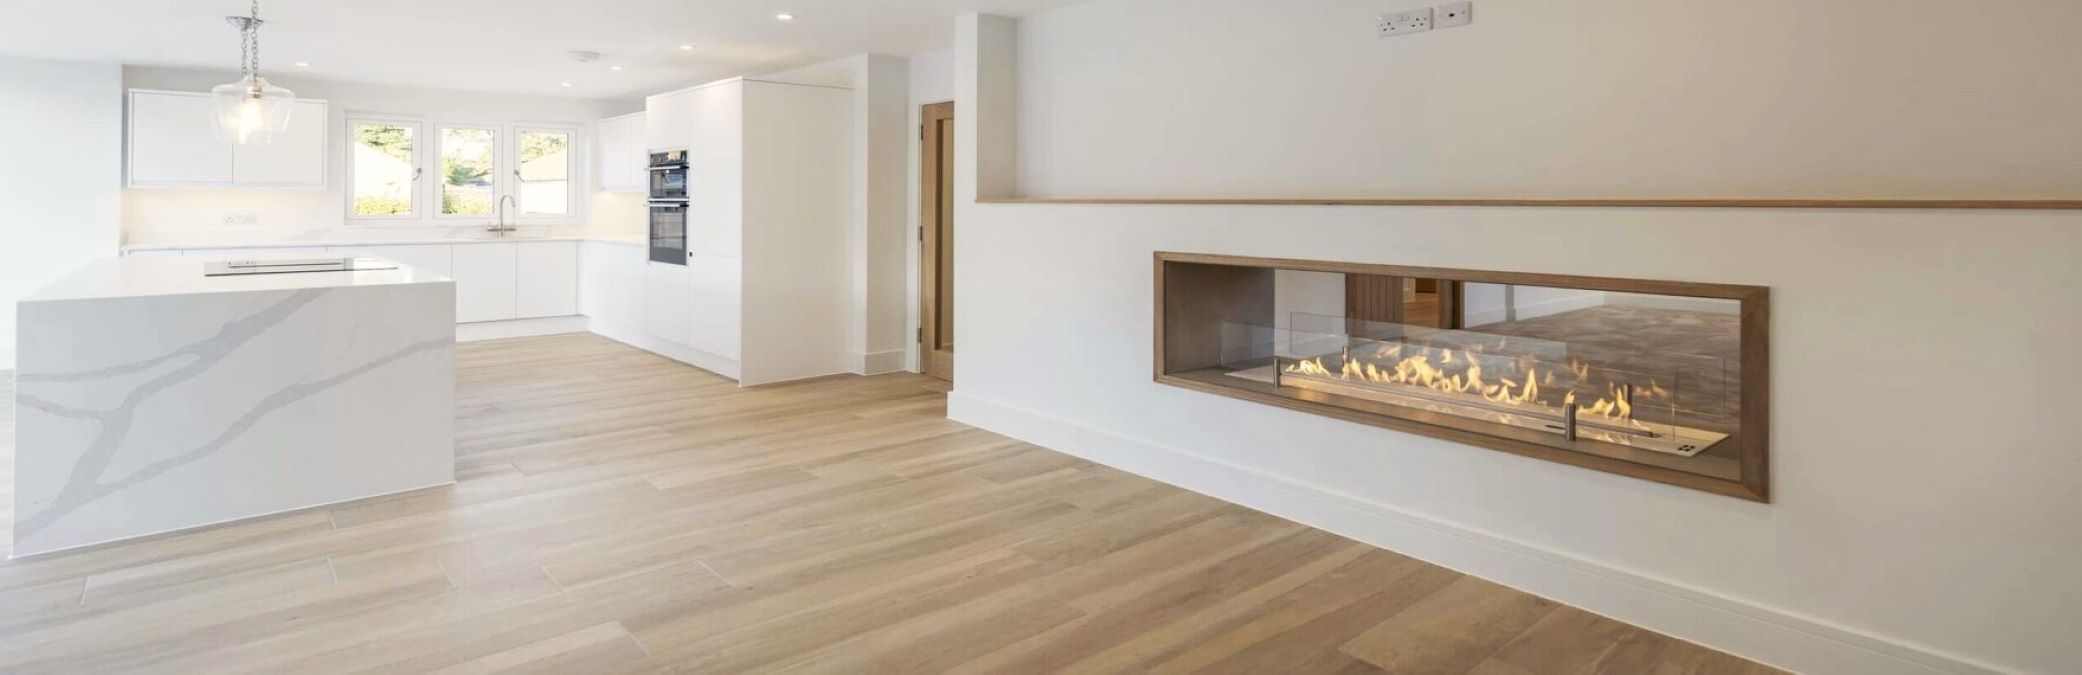 See-through fireplace with bioethanol insert in modern living room